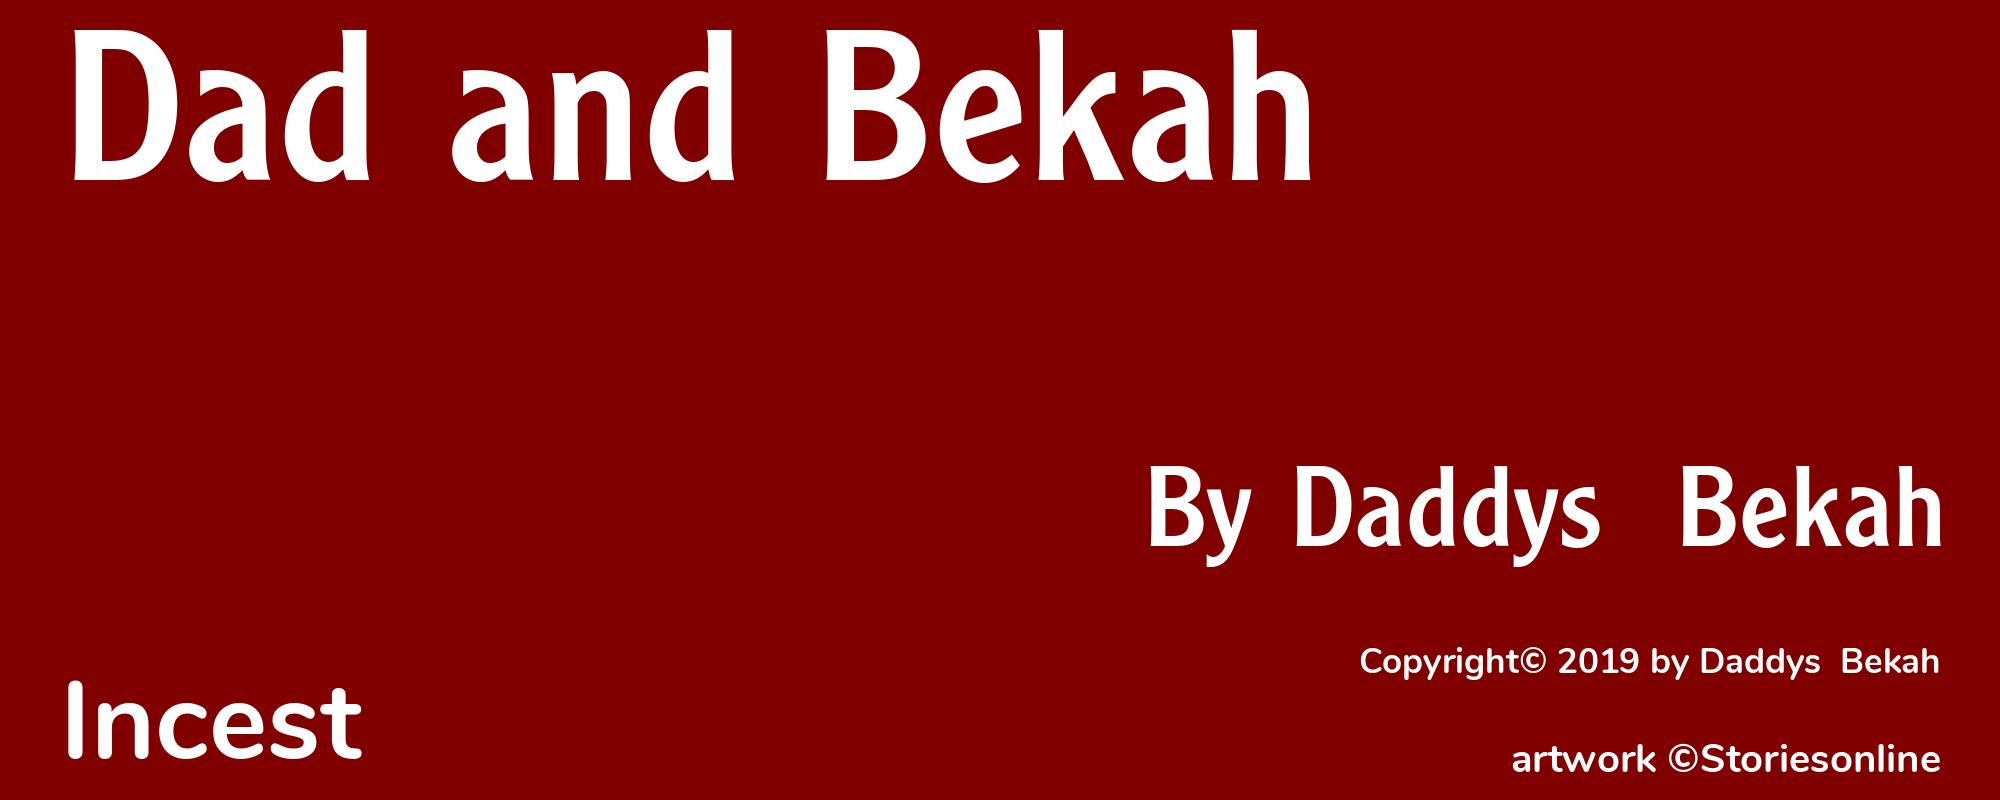 Dad and Bekah - Cover